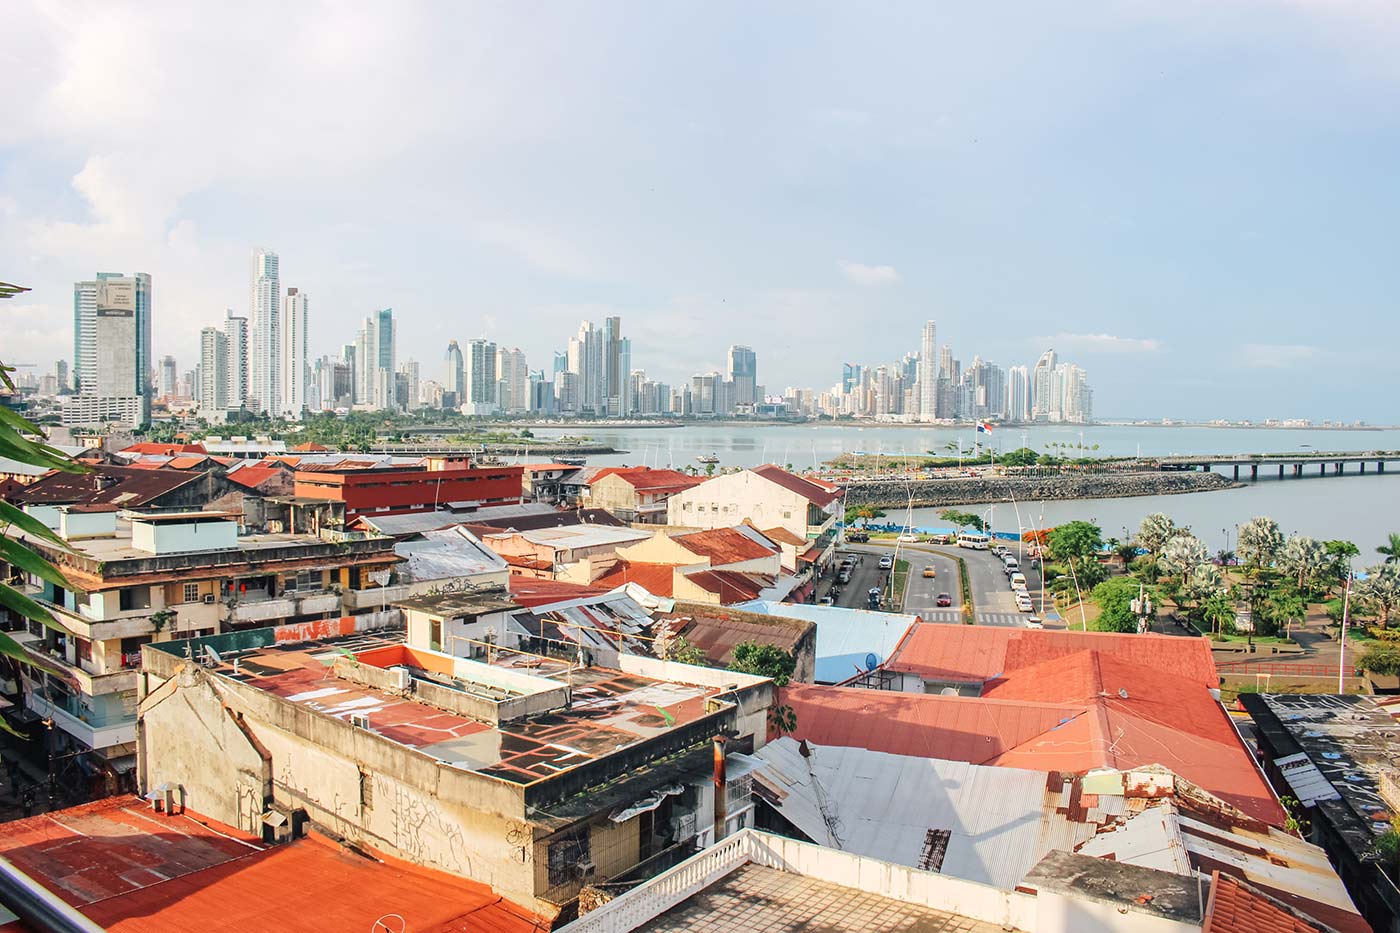 A guide to Casco Viejo in Panama City blog post travel guide